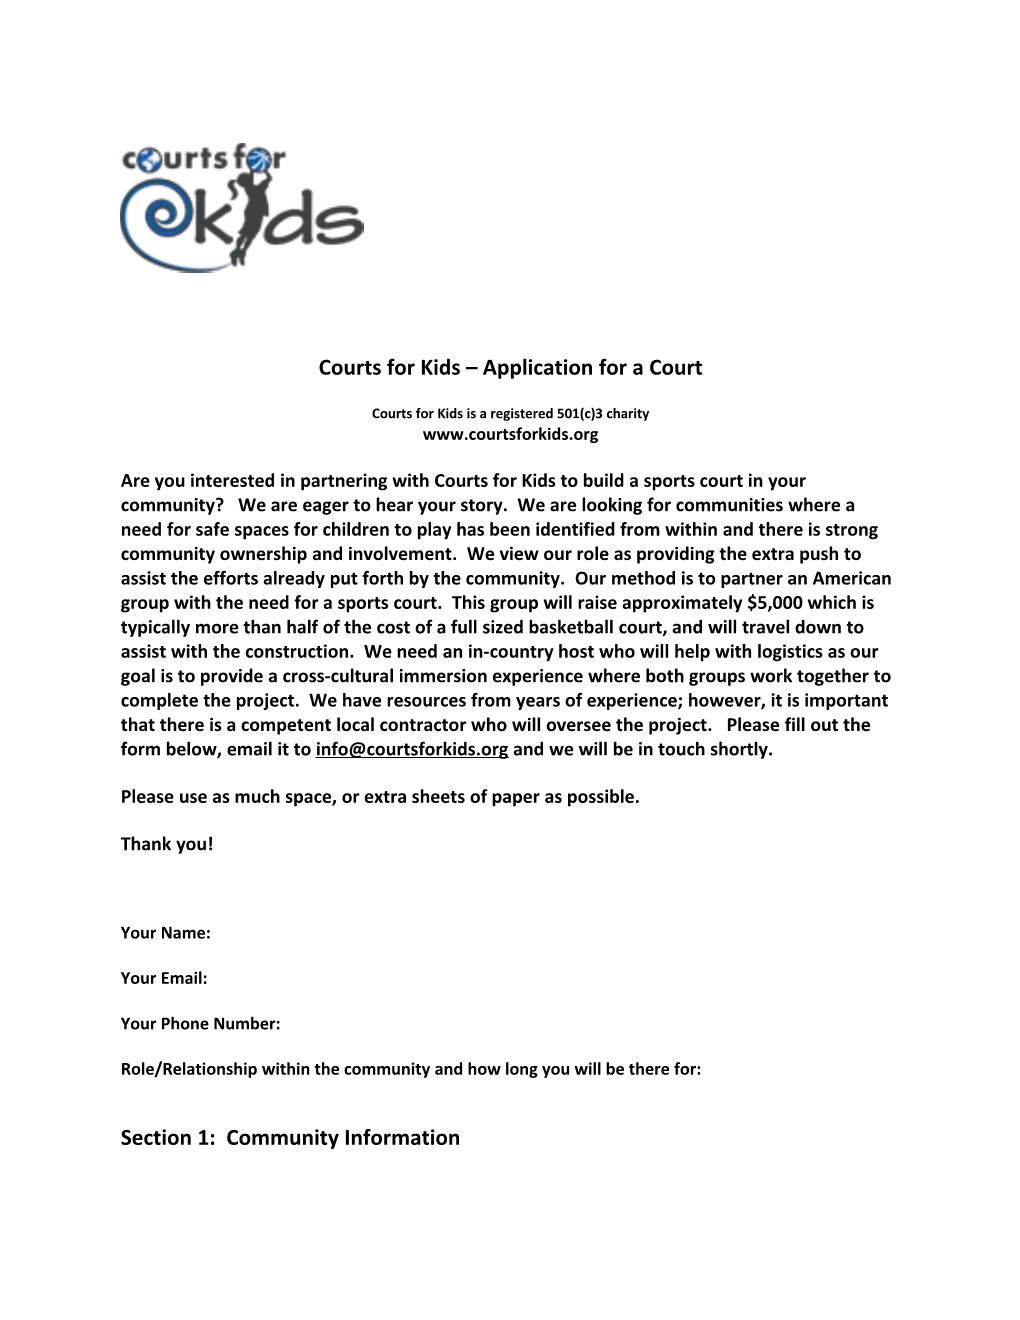 Courts for Kids Application for a Court